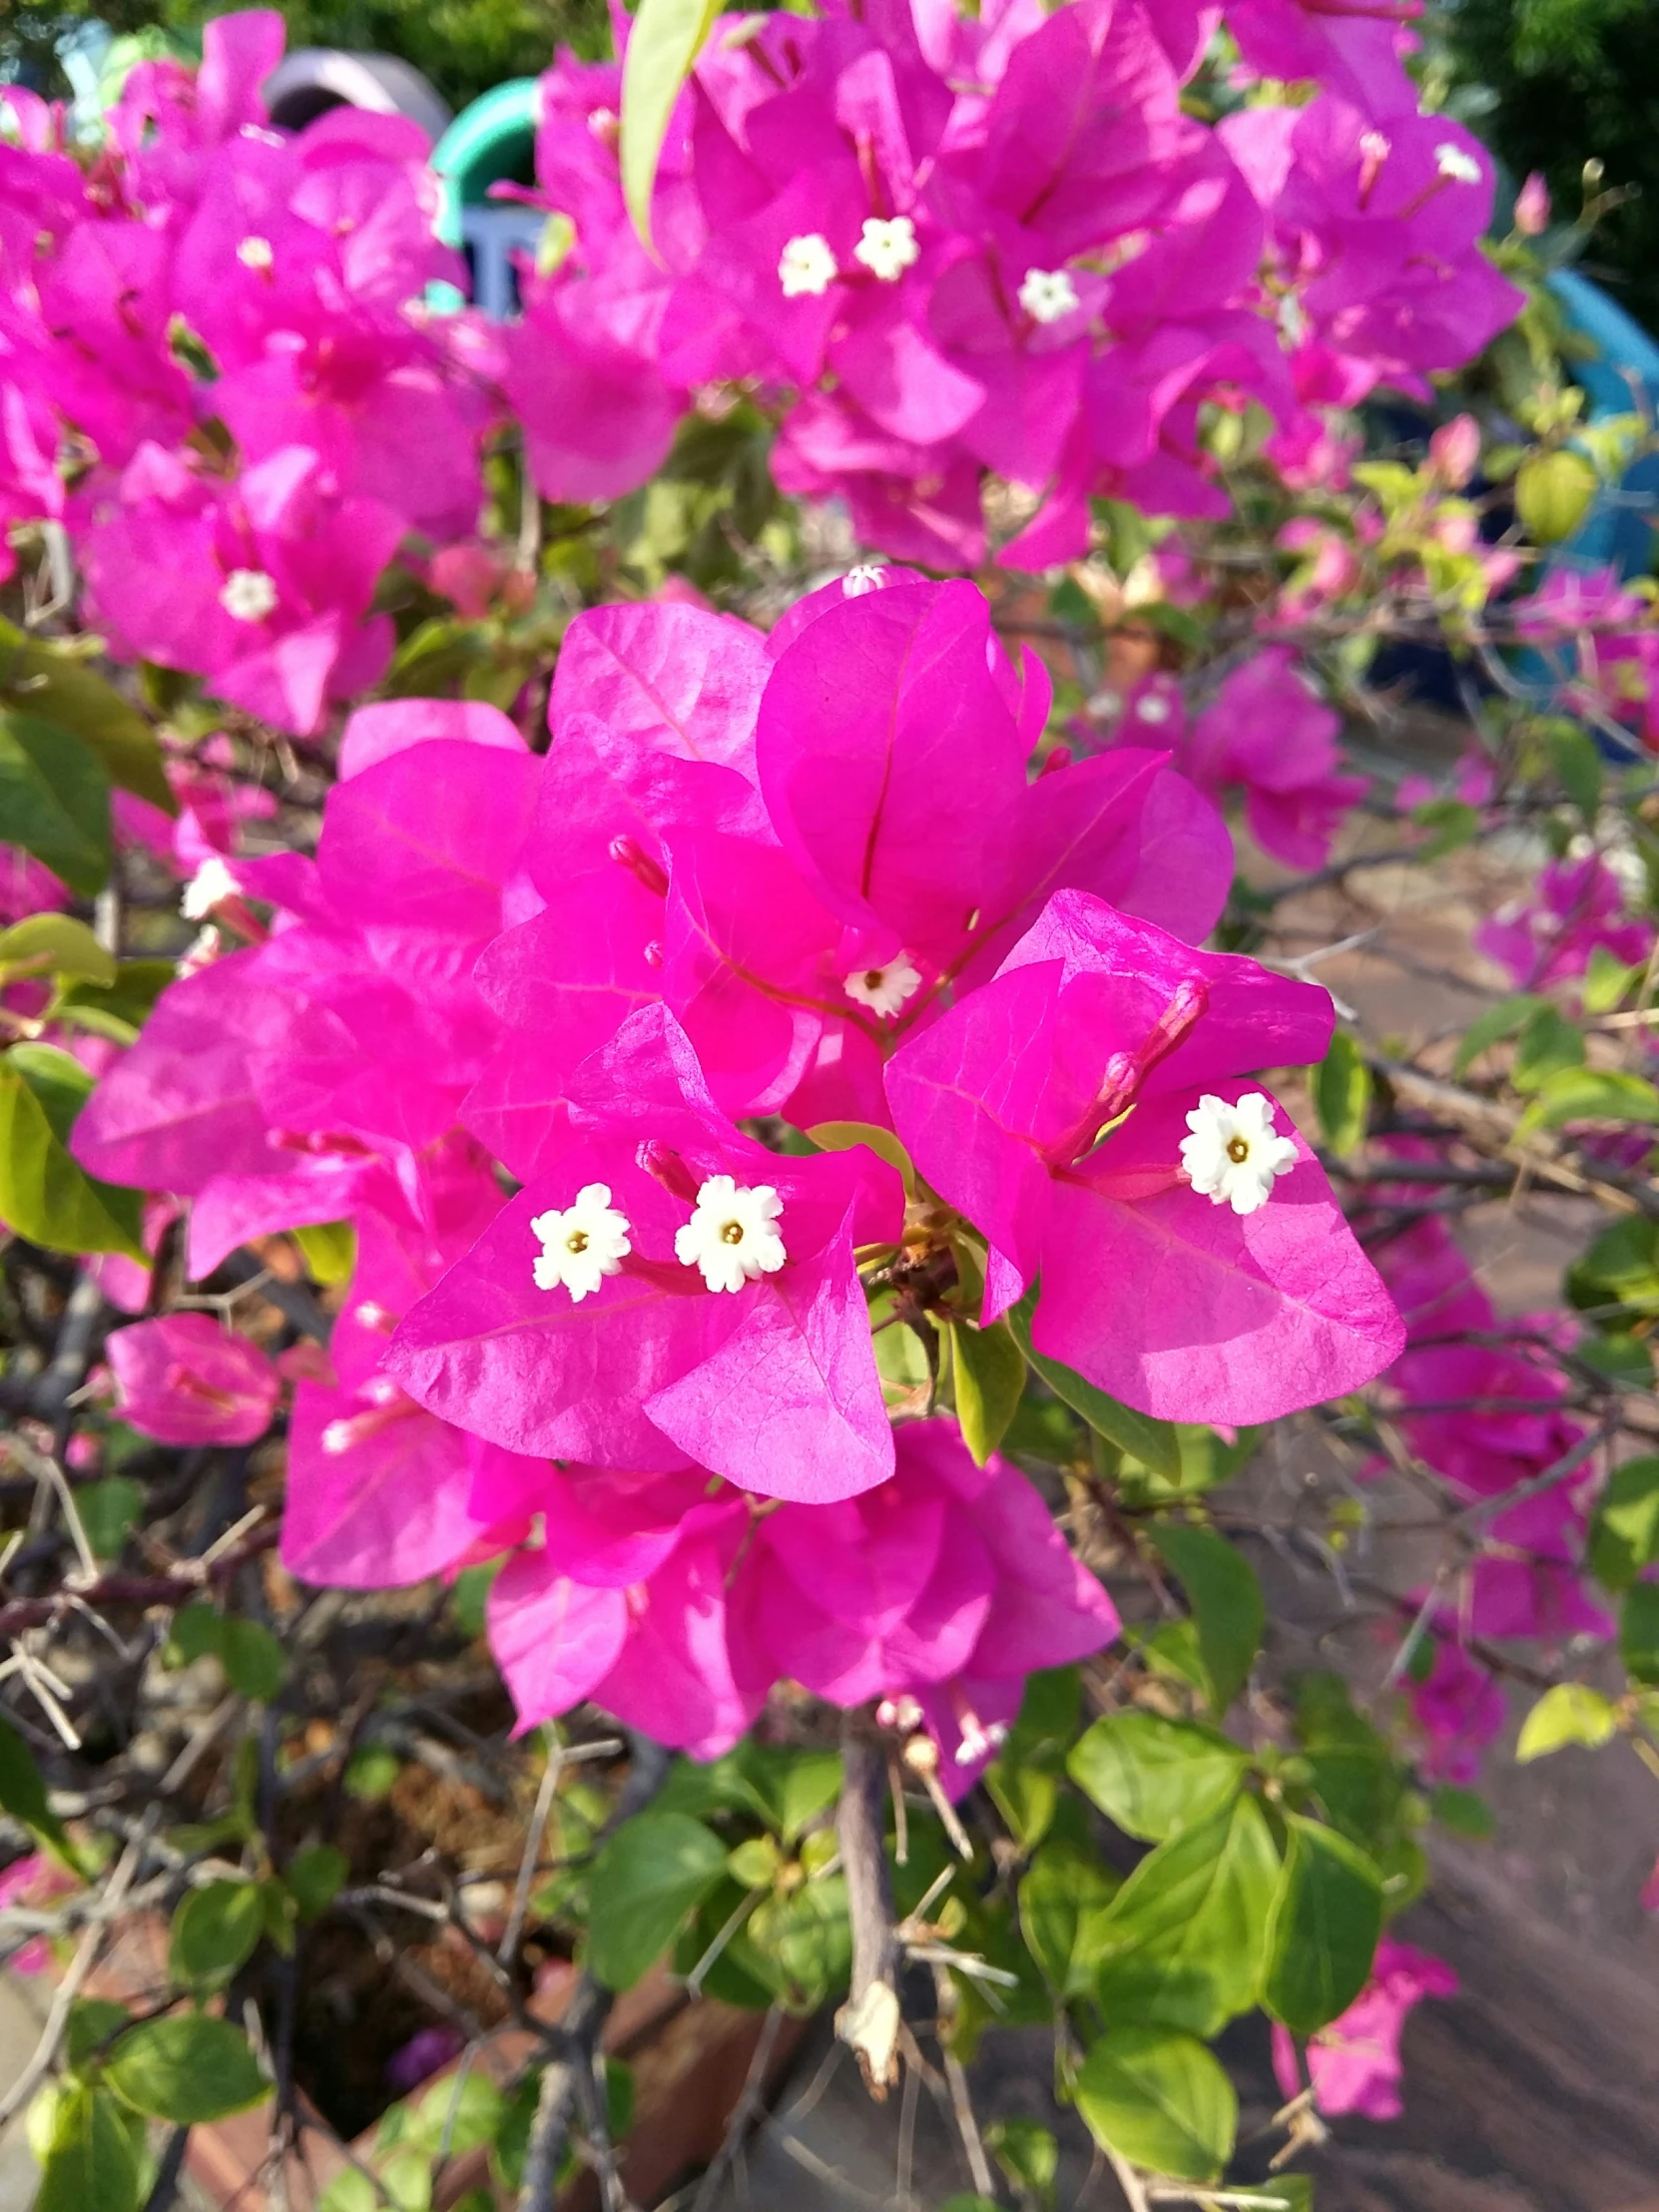 there are a bunch of pink flowers in this plant